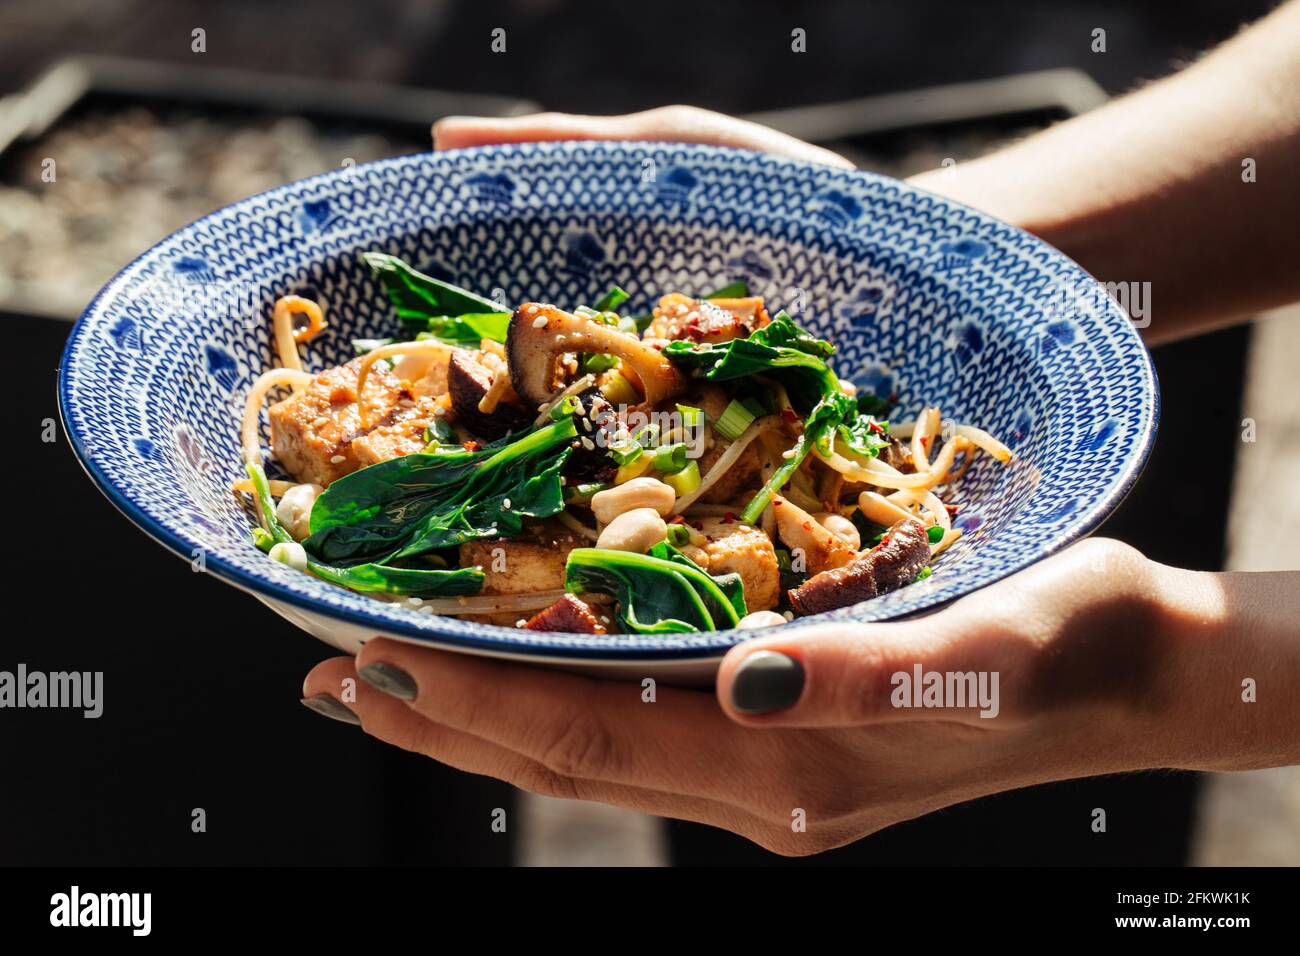 Hands holding fried tofu with spinach and nuts Stock Photo